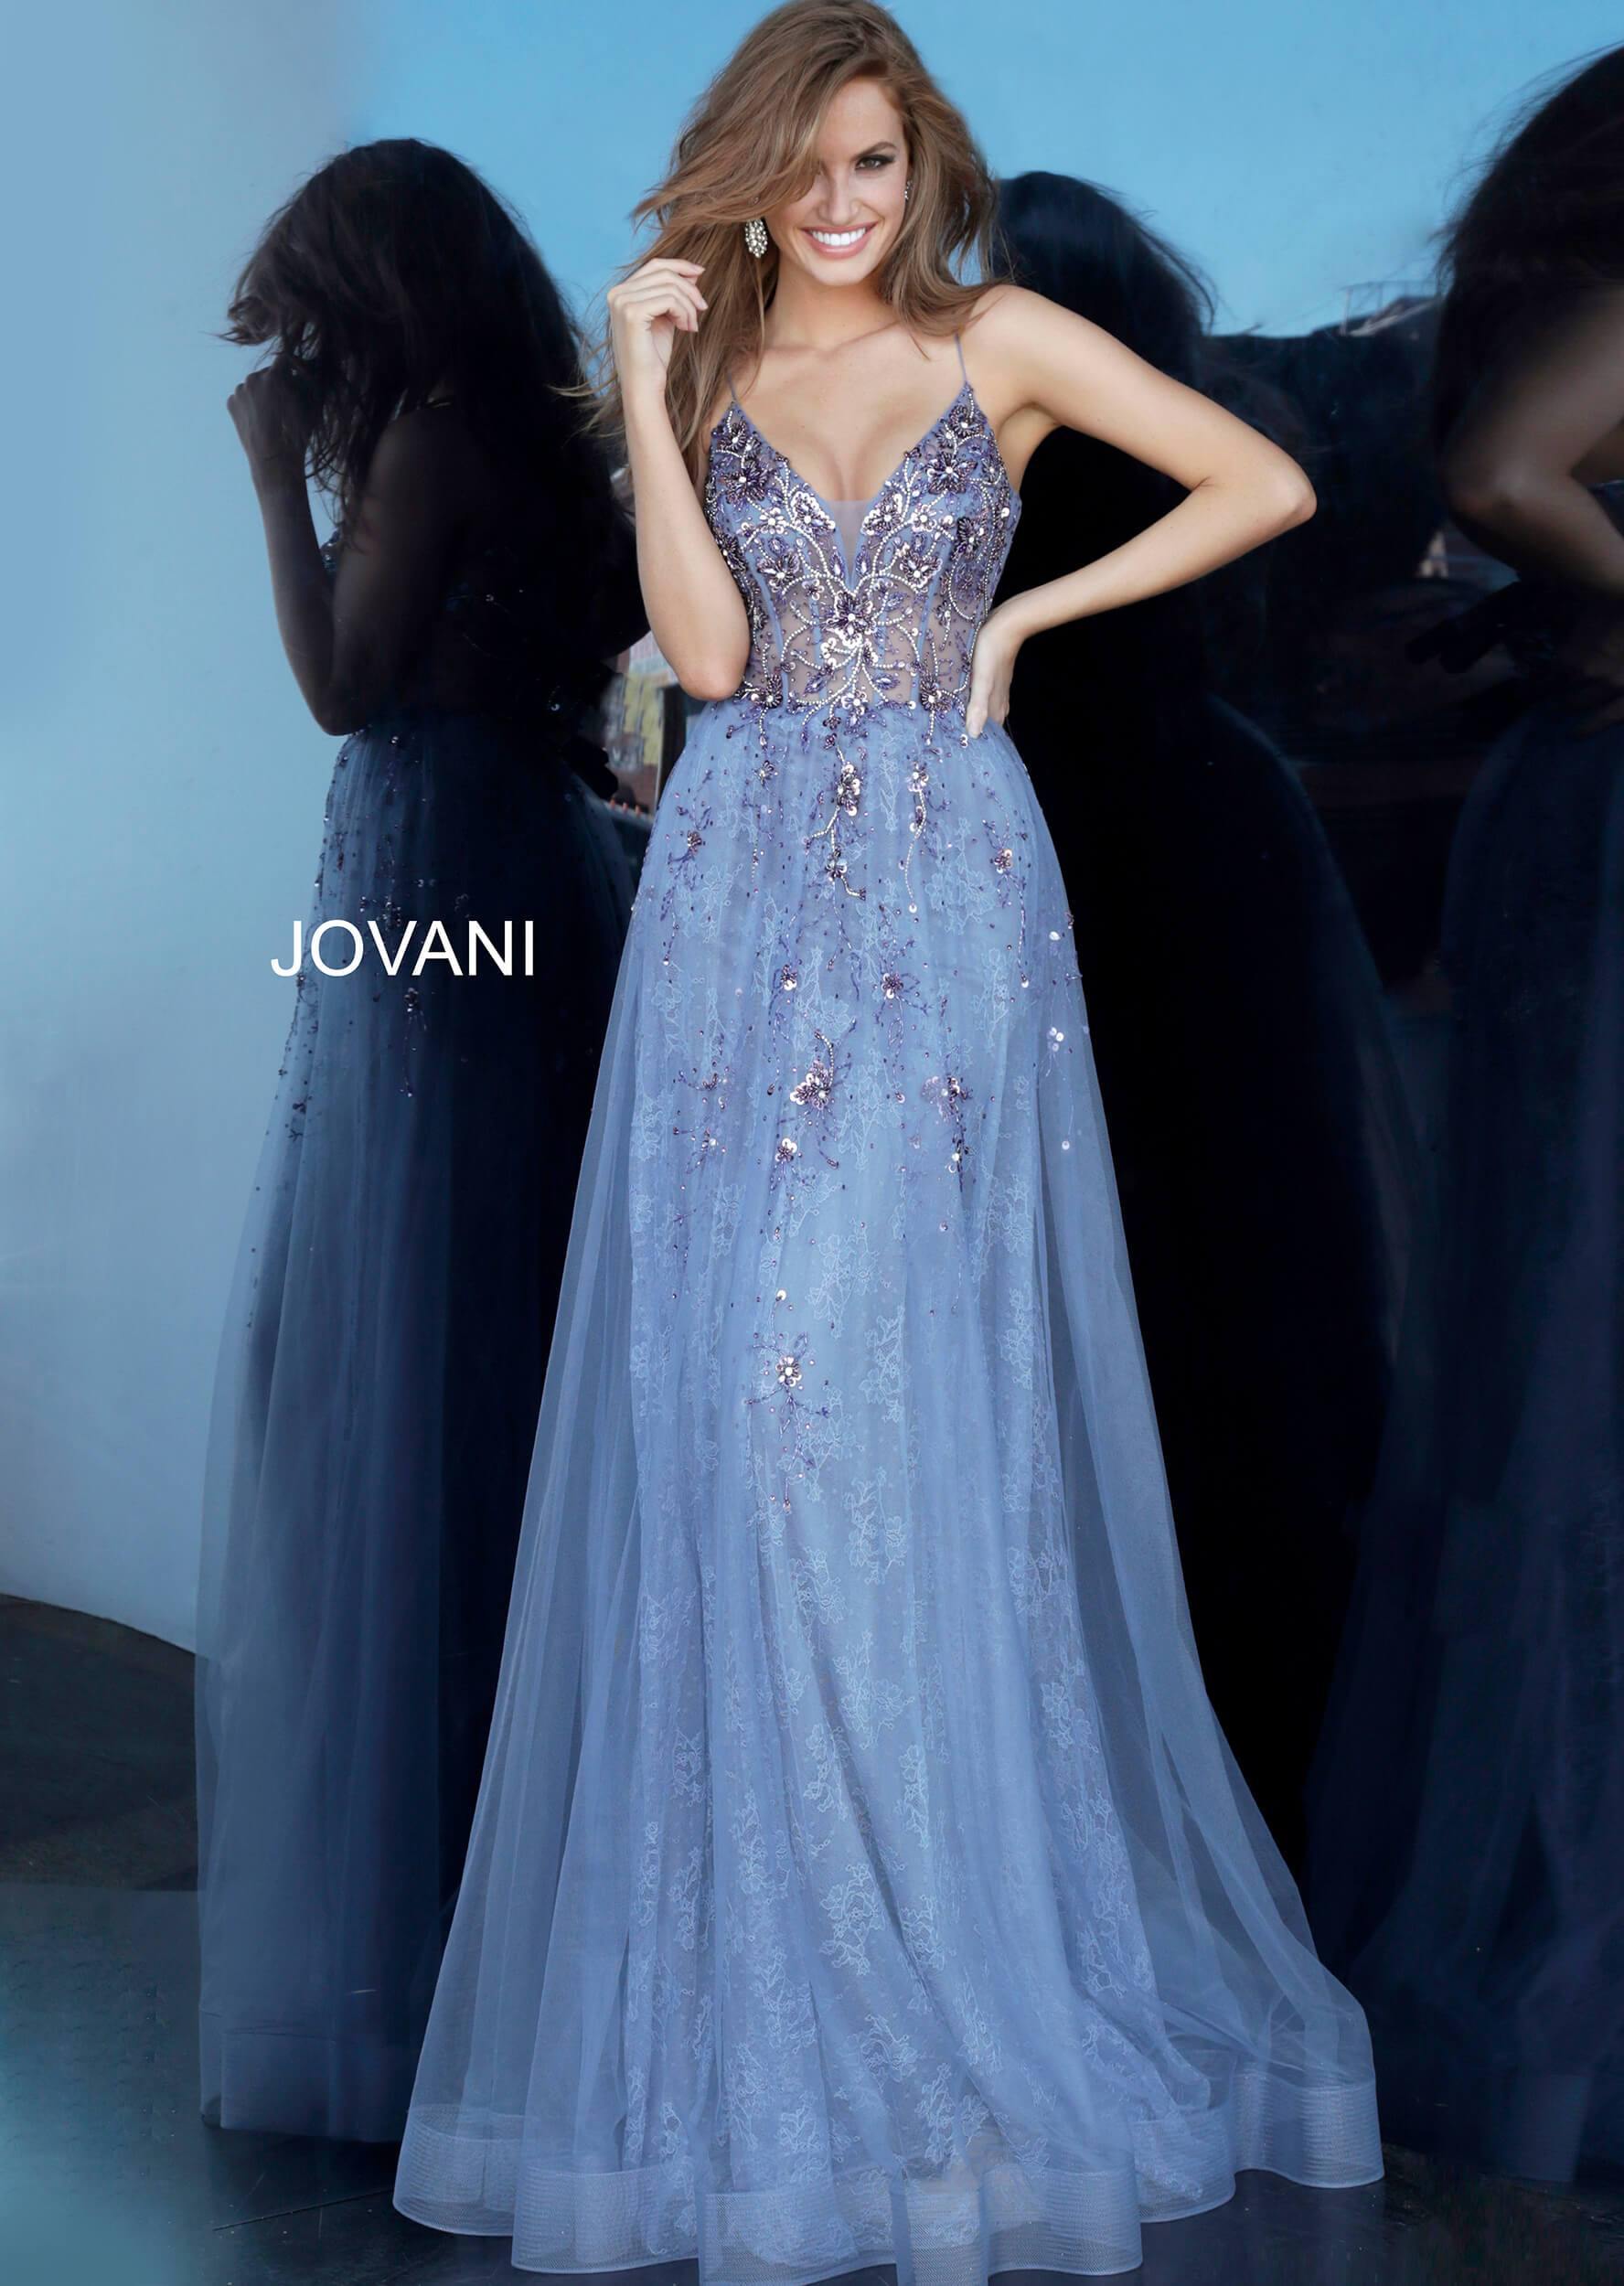 Jovani 2526 Long Spaghetti Strap Prom Gown | The Dress Outlet